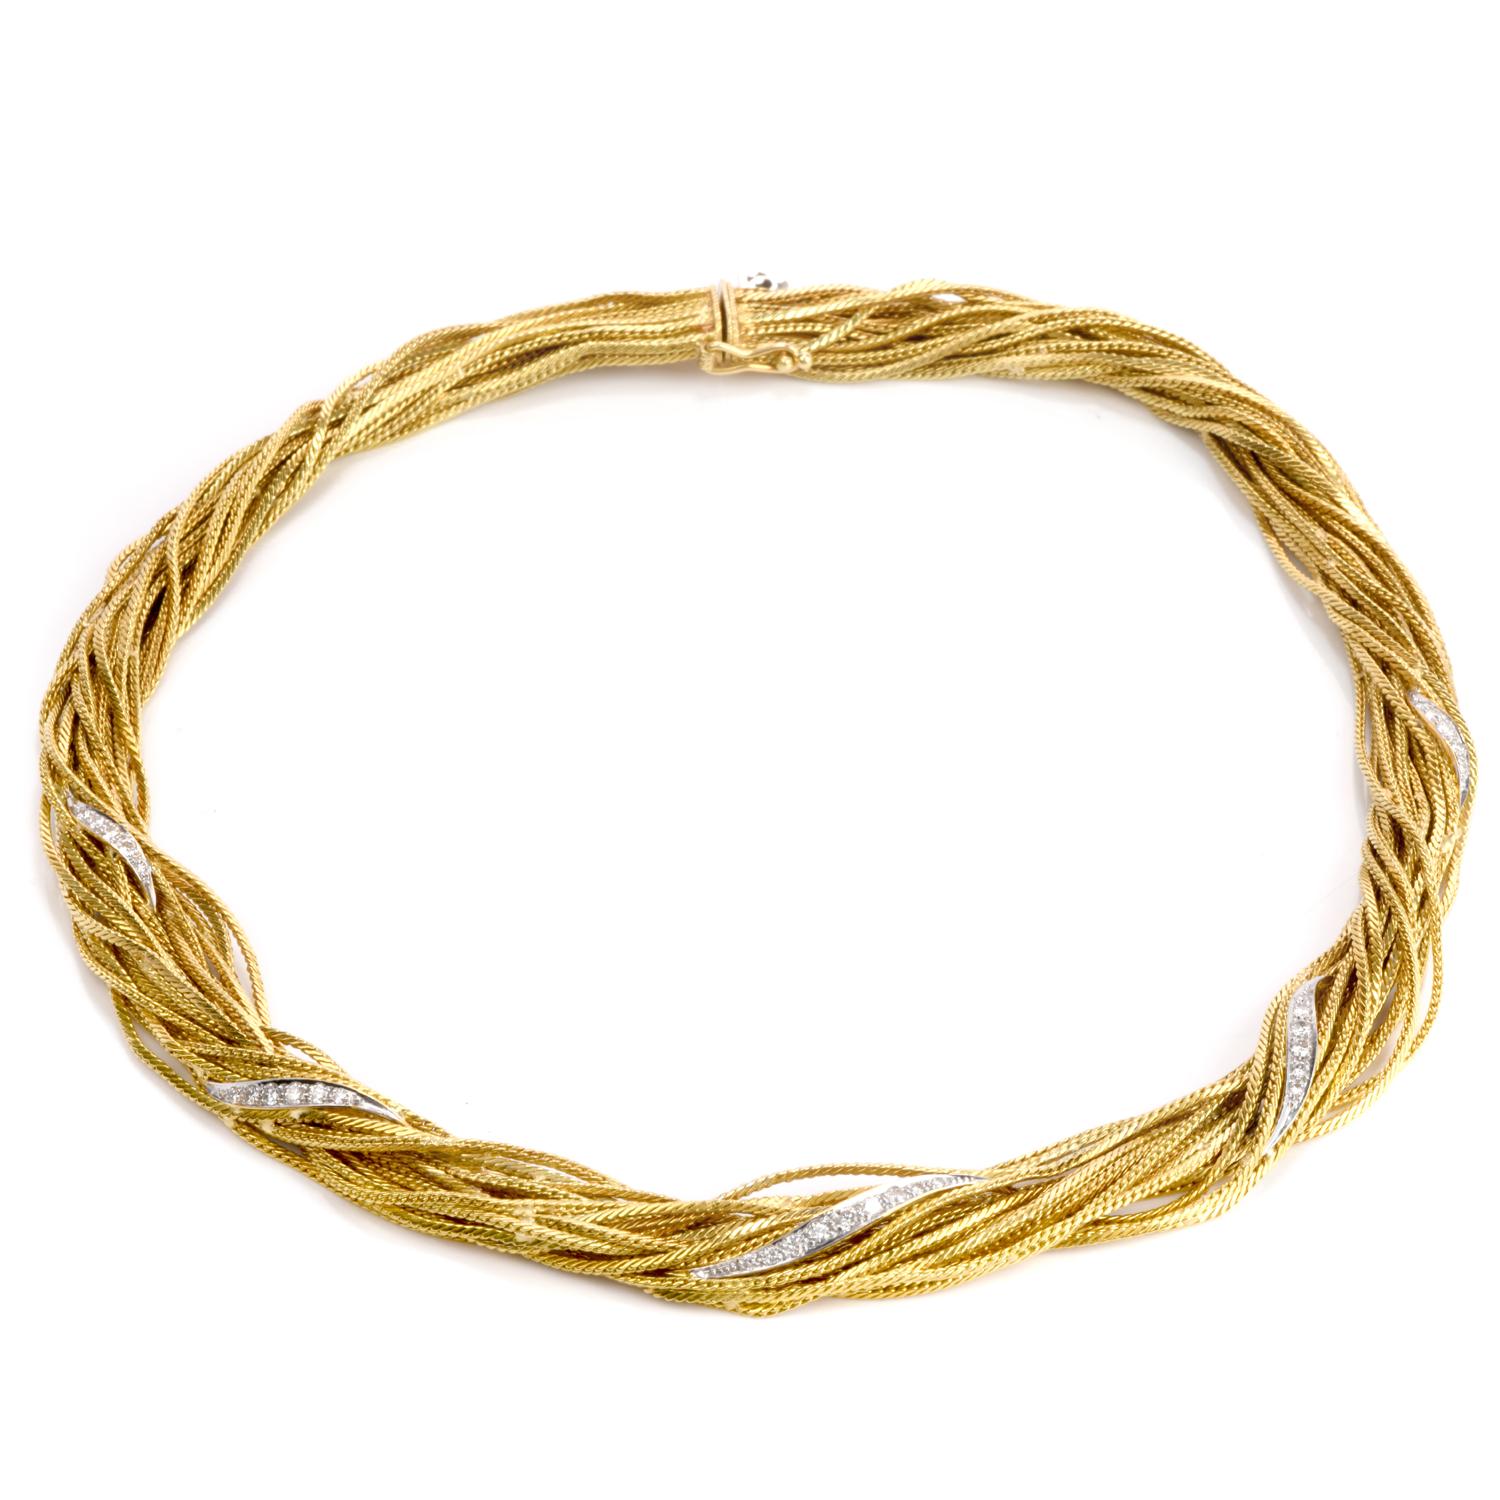 This Vintage 1980's Wellendorff Multi strand chocker necklace is made of 18 karat gold as soft and smooth as silk, fashioned using a technique developed over 43 years ago by Hanspeter Wellendorff Germany. Thin gold stands of gold wrap around by hand